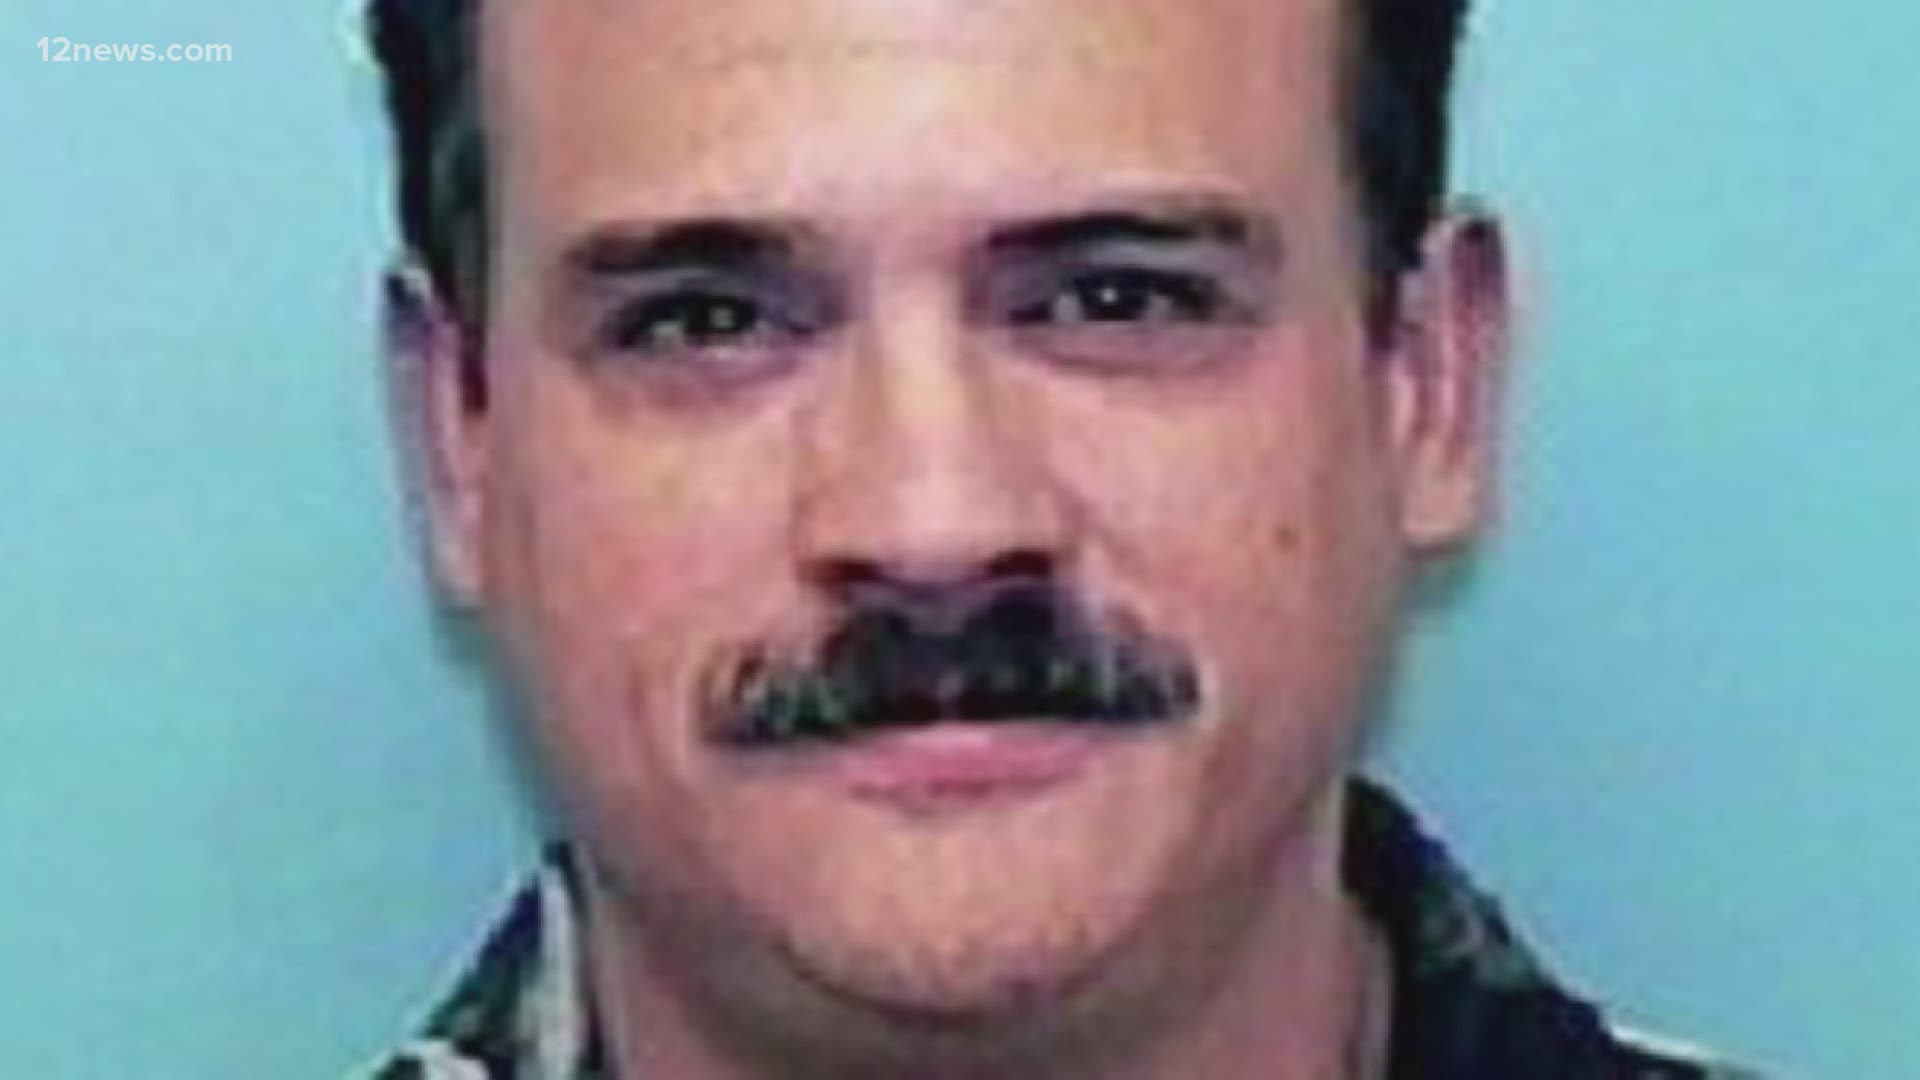 A former Arizona DPS trooper is wanted by the FBI in connection with a $9 million fraud scheme.